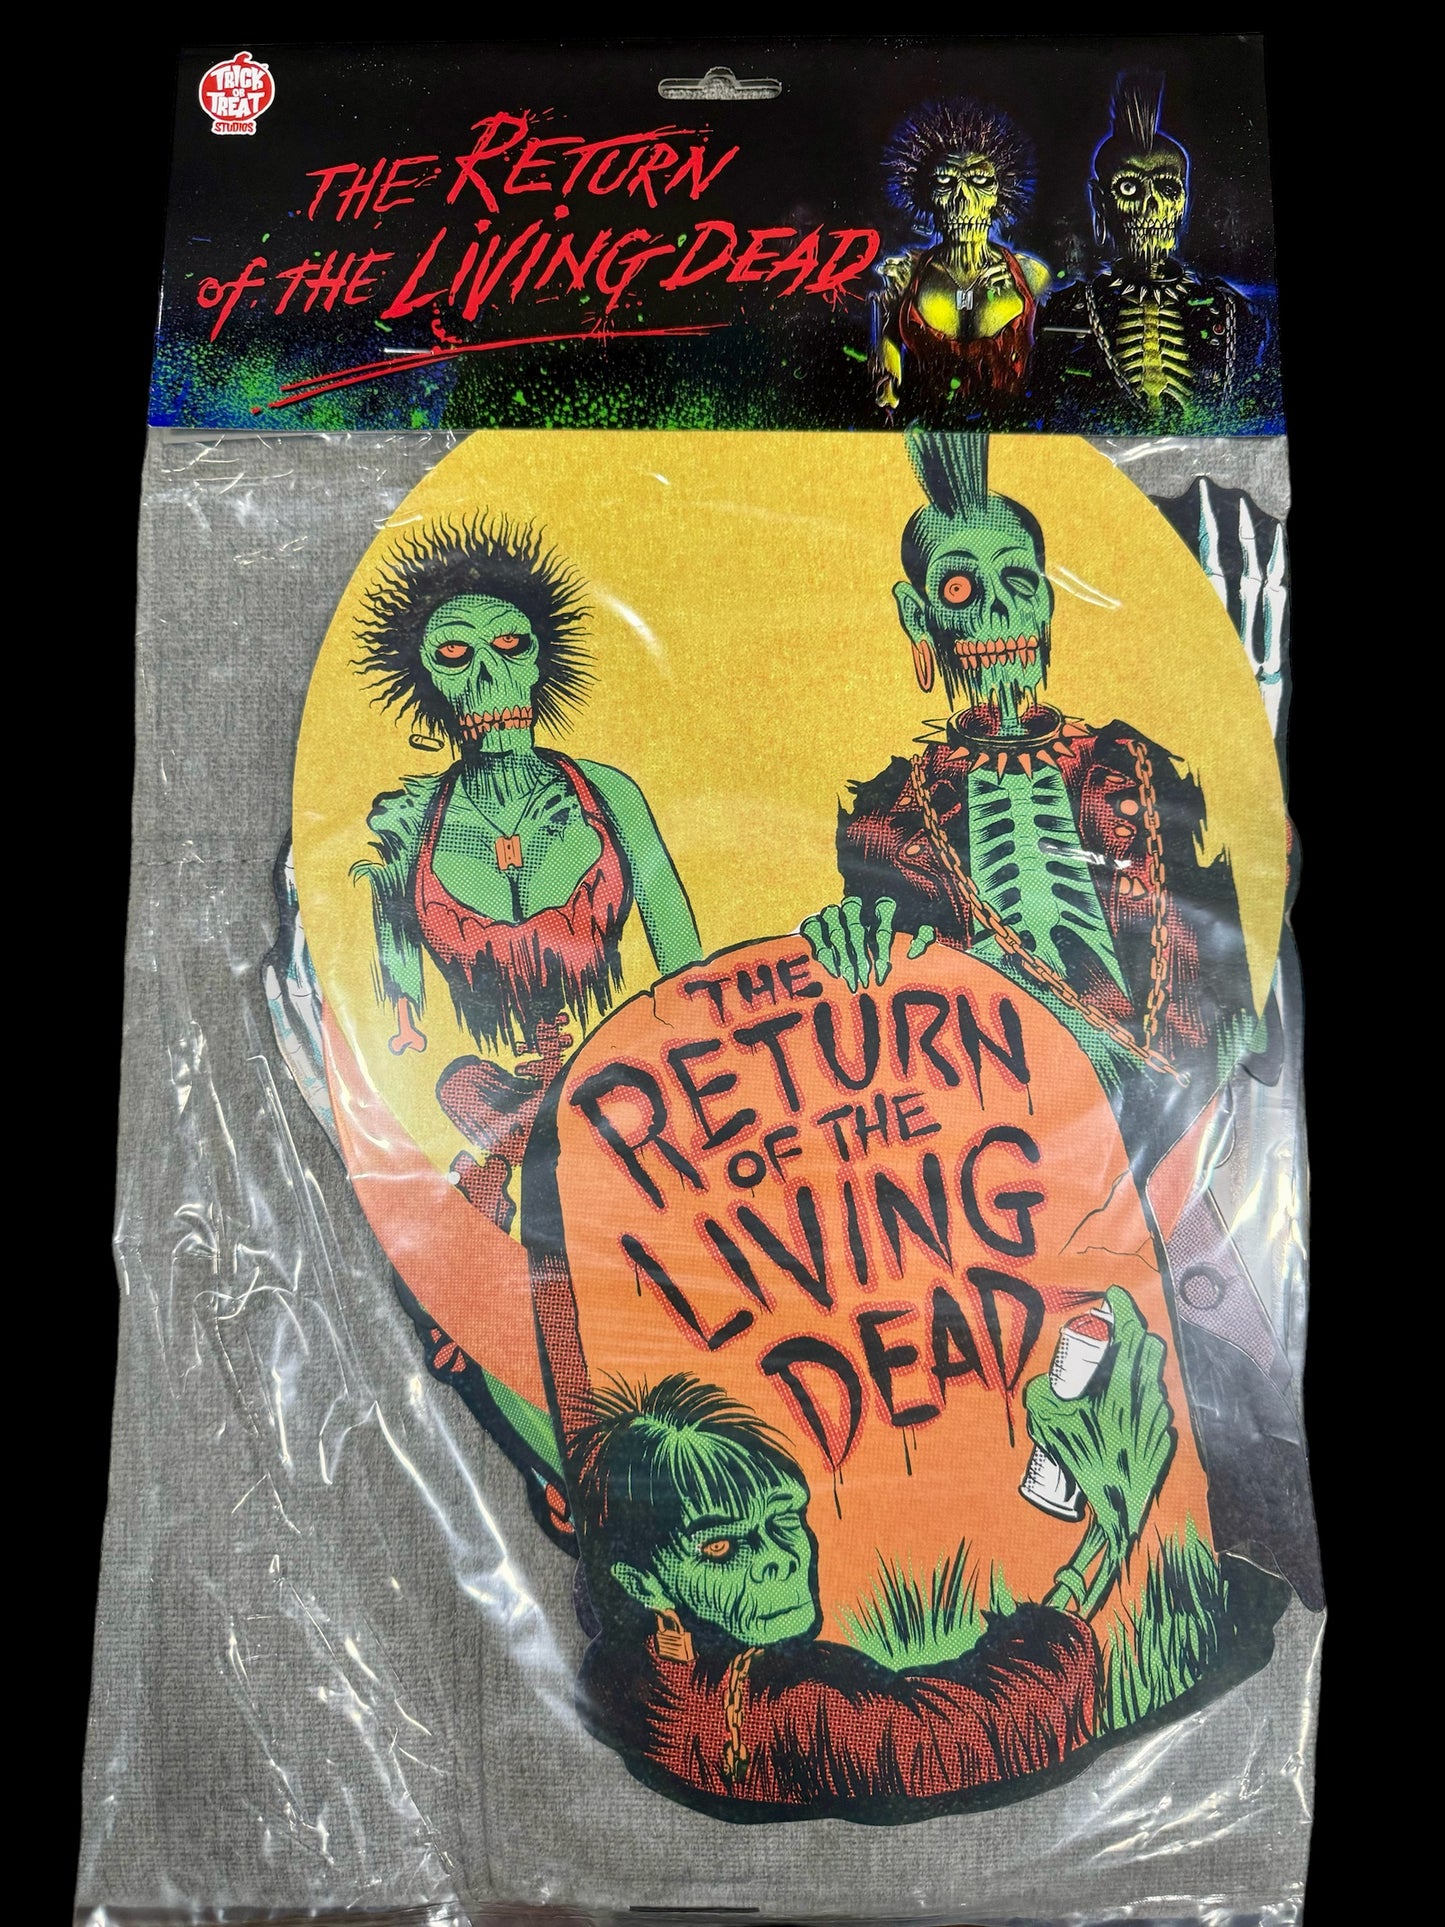 THE RETURN OF THE LIVING DEAD WALL DECOR COLLECTION - SERIES 1